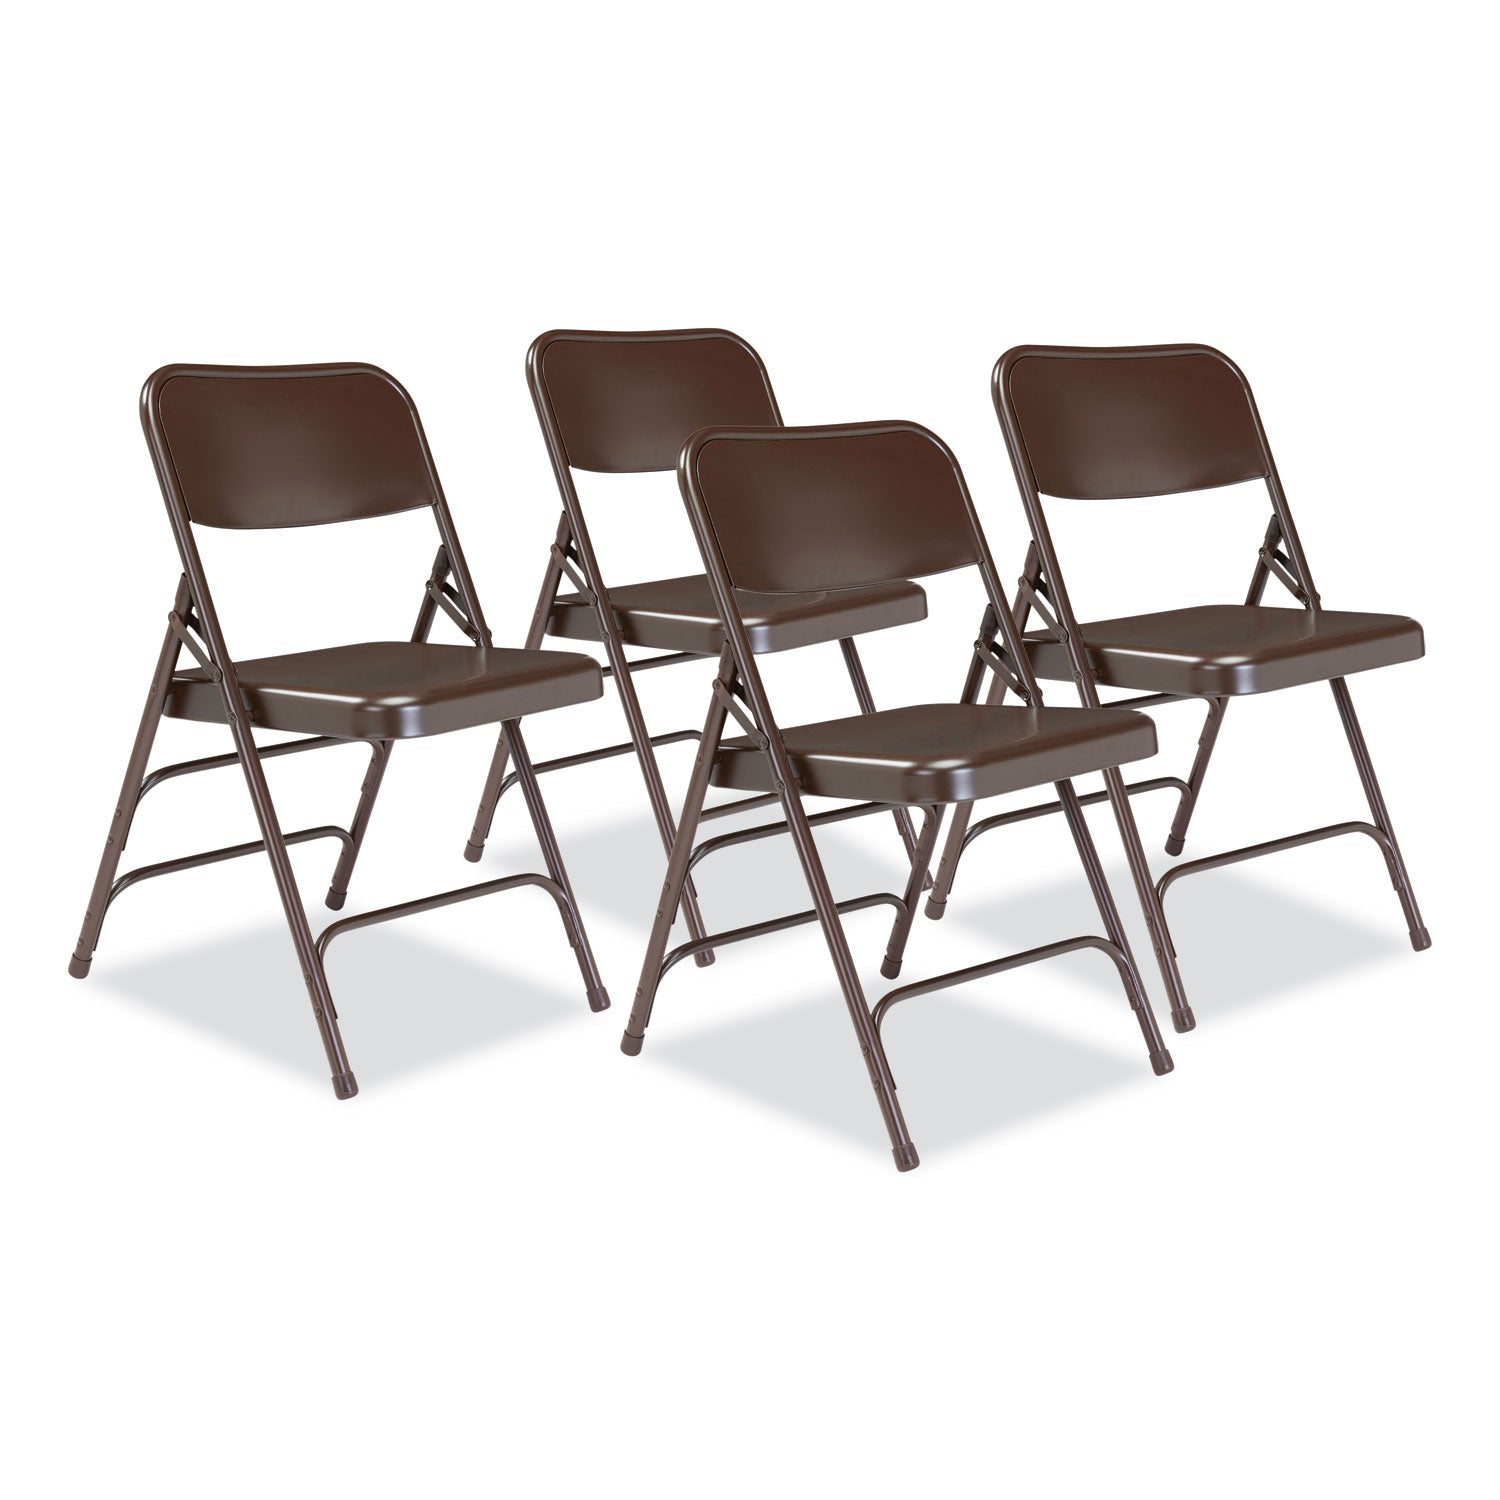 300-series-deluxe-all-steel-triple-brace-folding-chair-supports-480-lb-1725-seat-ht-brown-4-ct-ships-in-1-3-bus-days_nps303 - 1